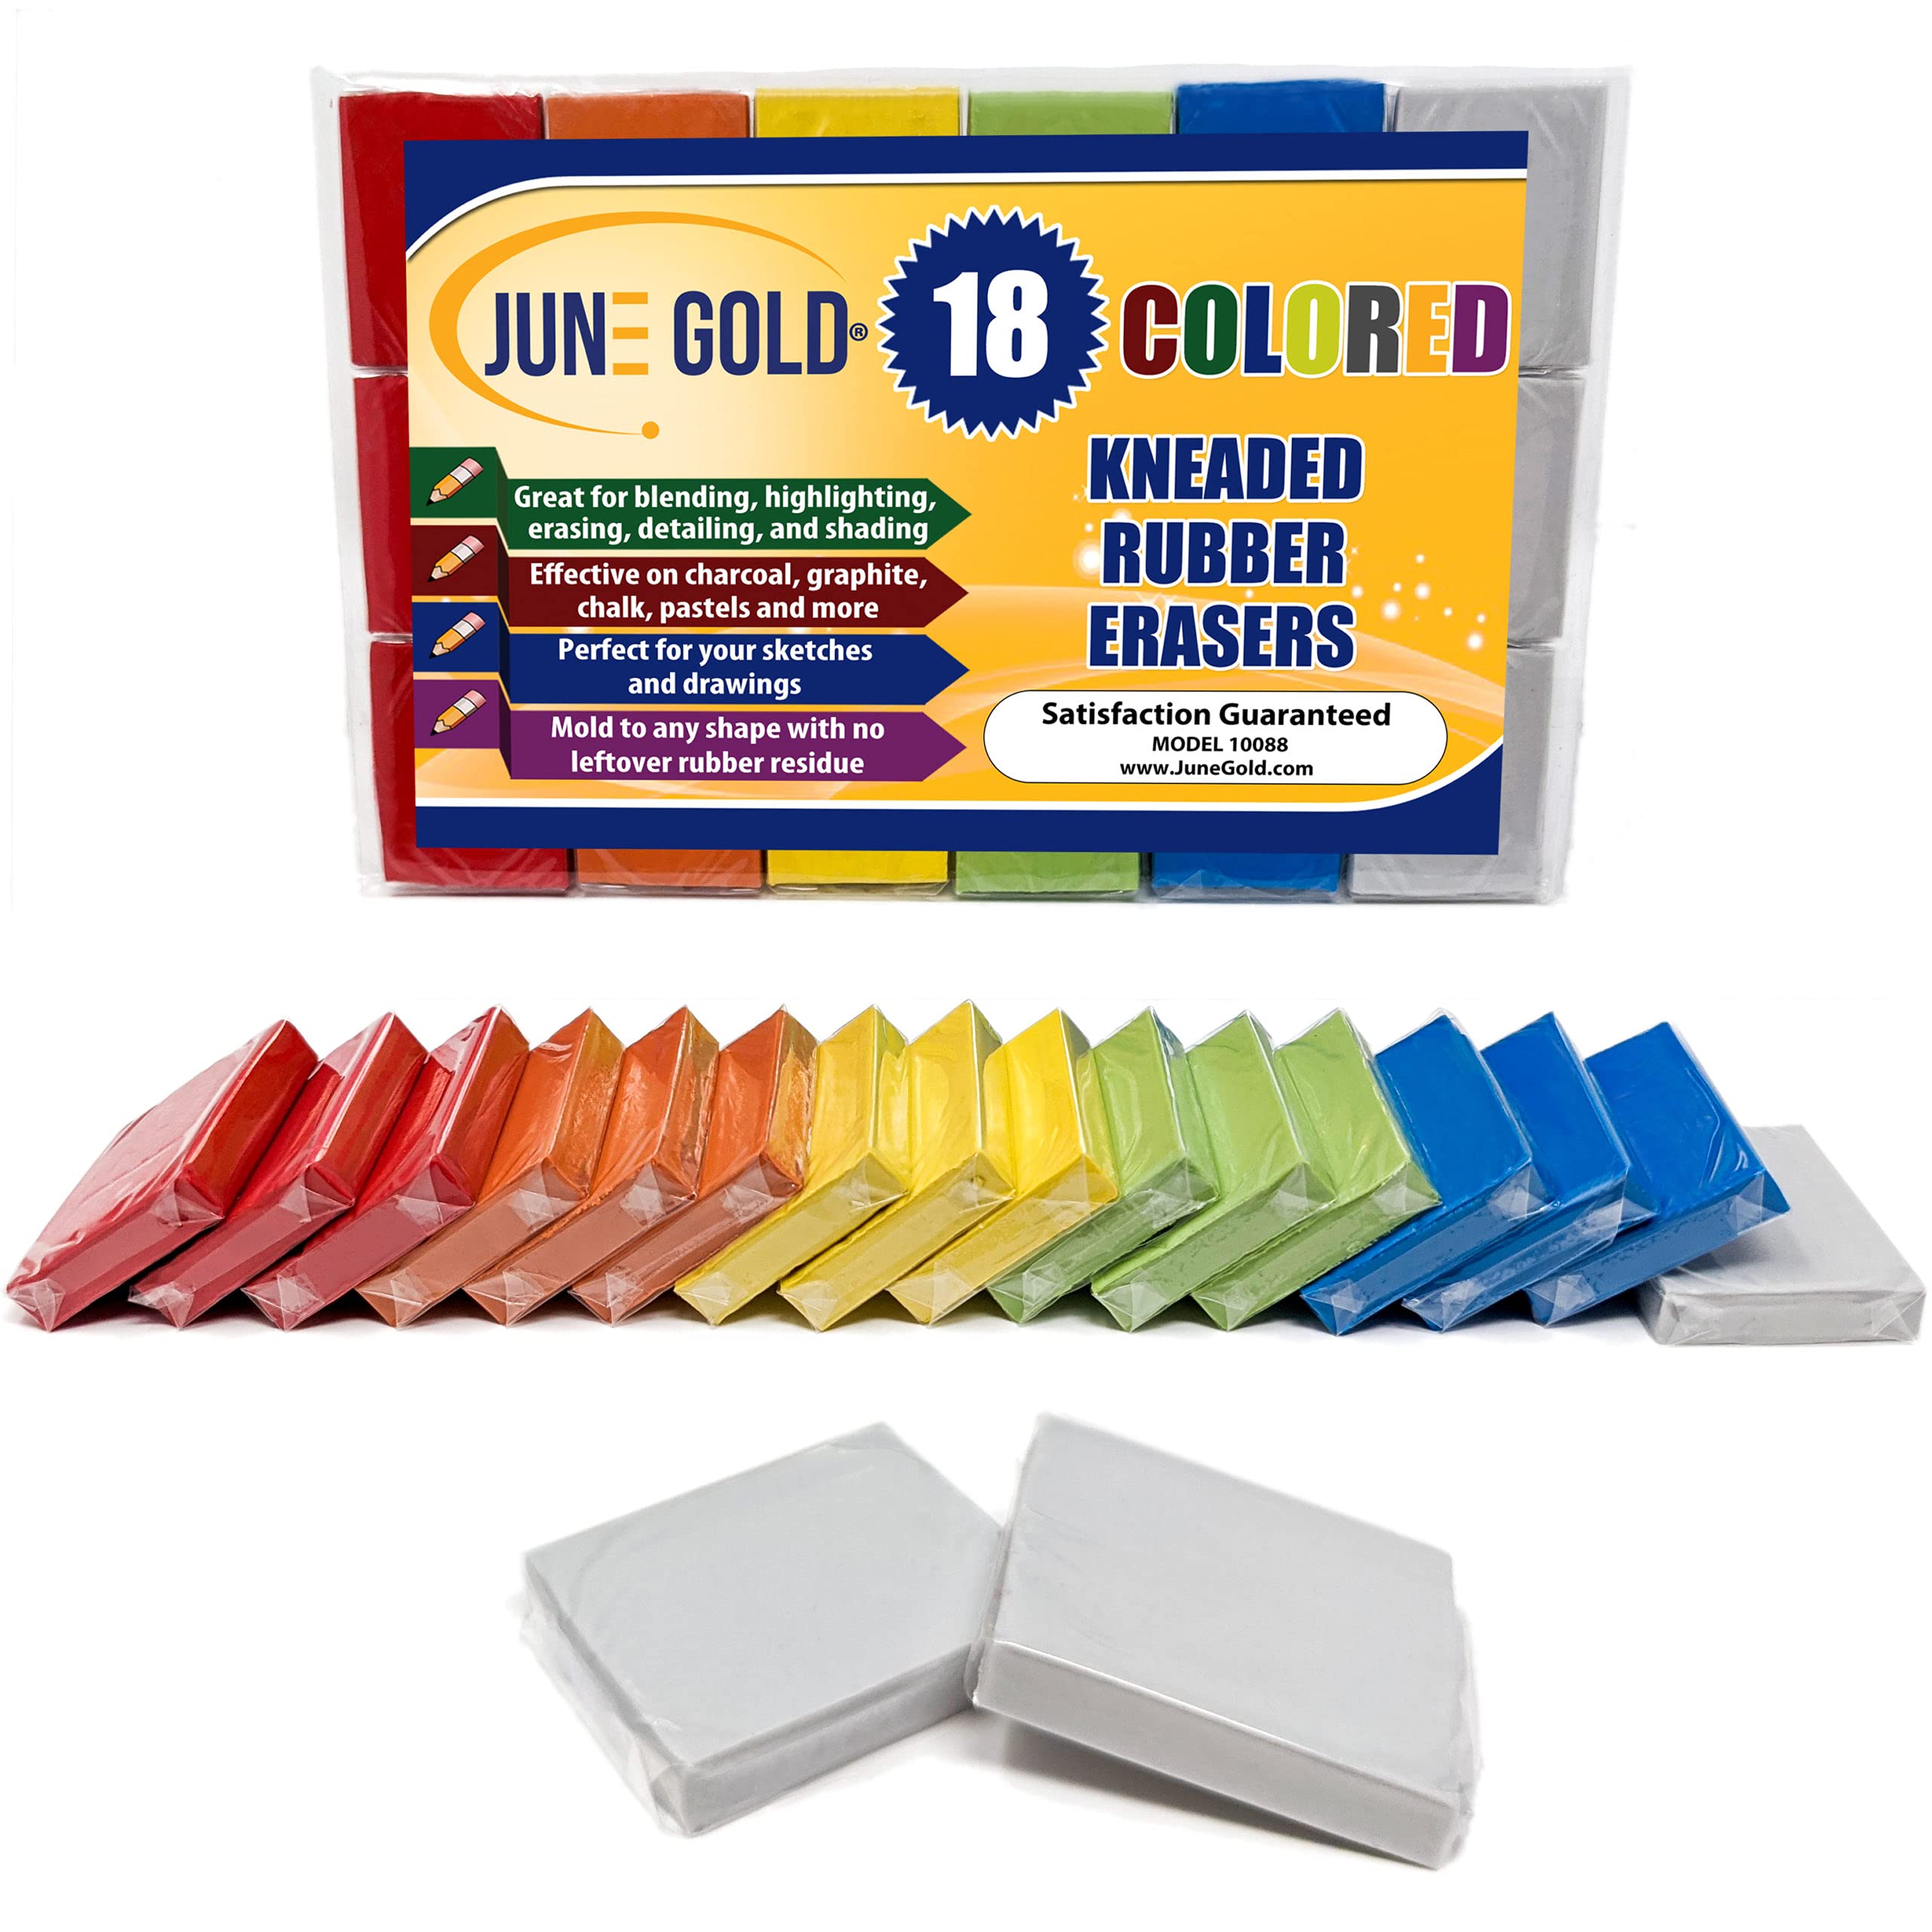 June Gold Kneaded Rubber Erasers Colored 18 Pack - Blend Shade